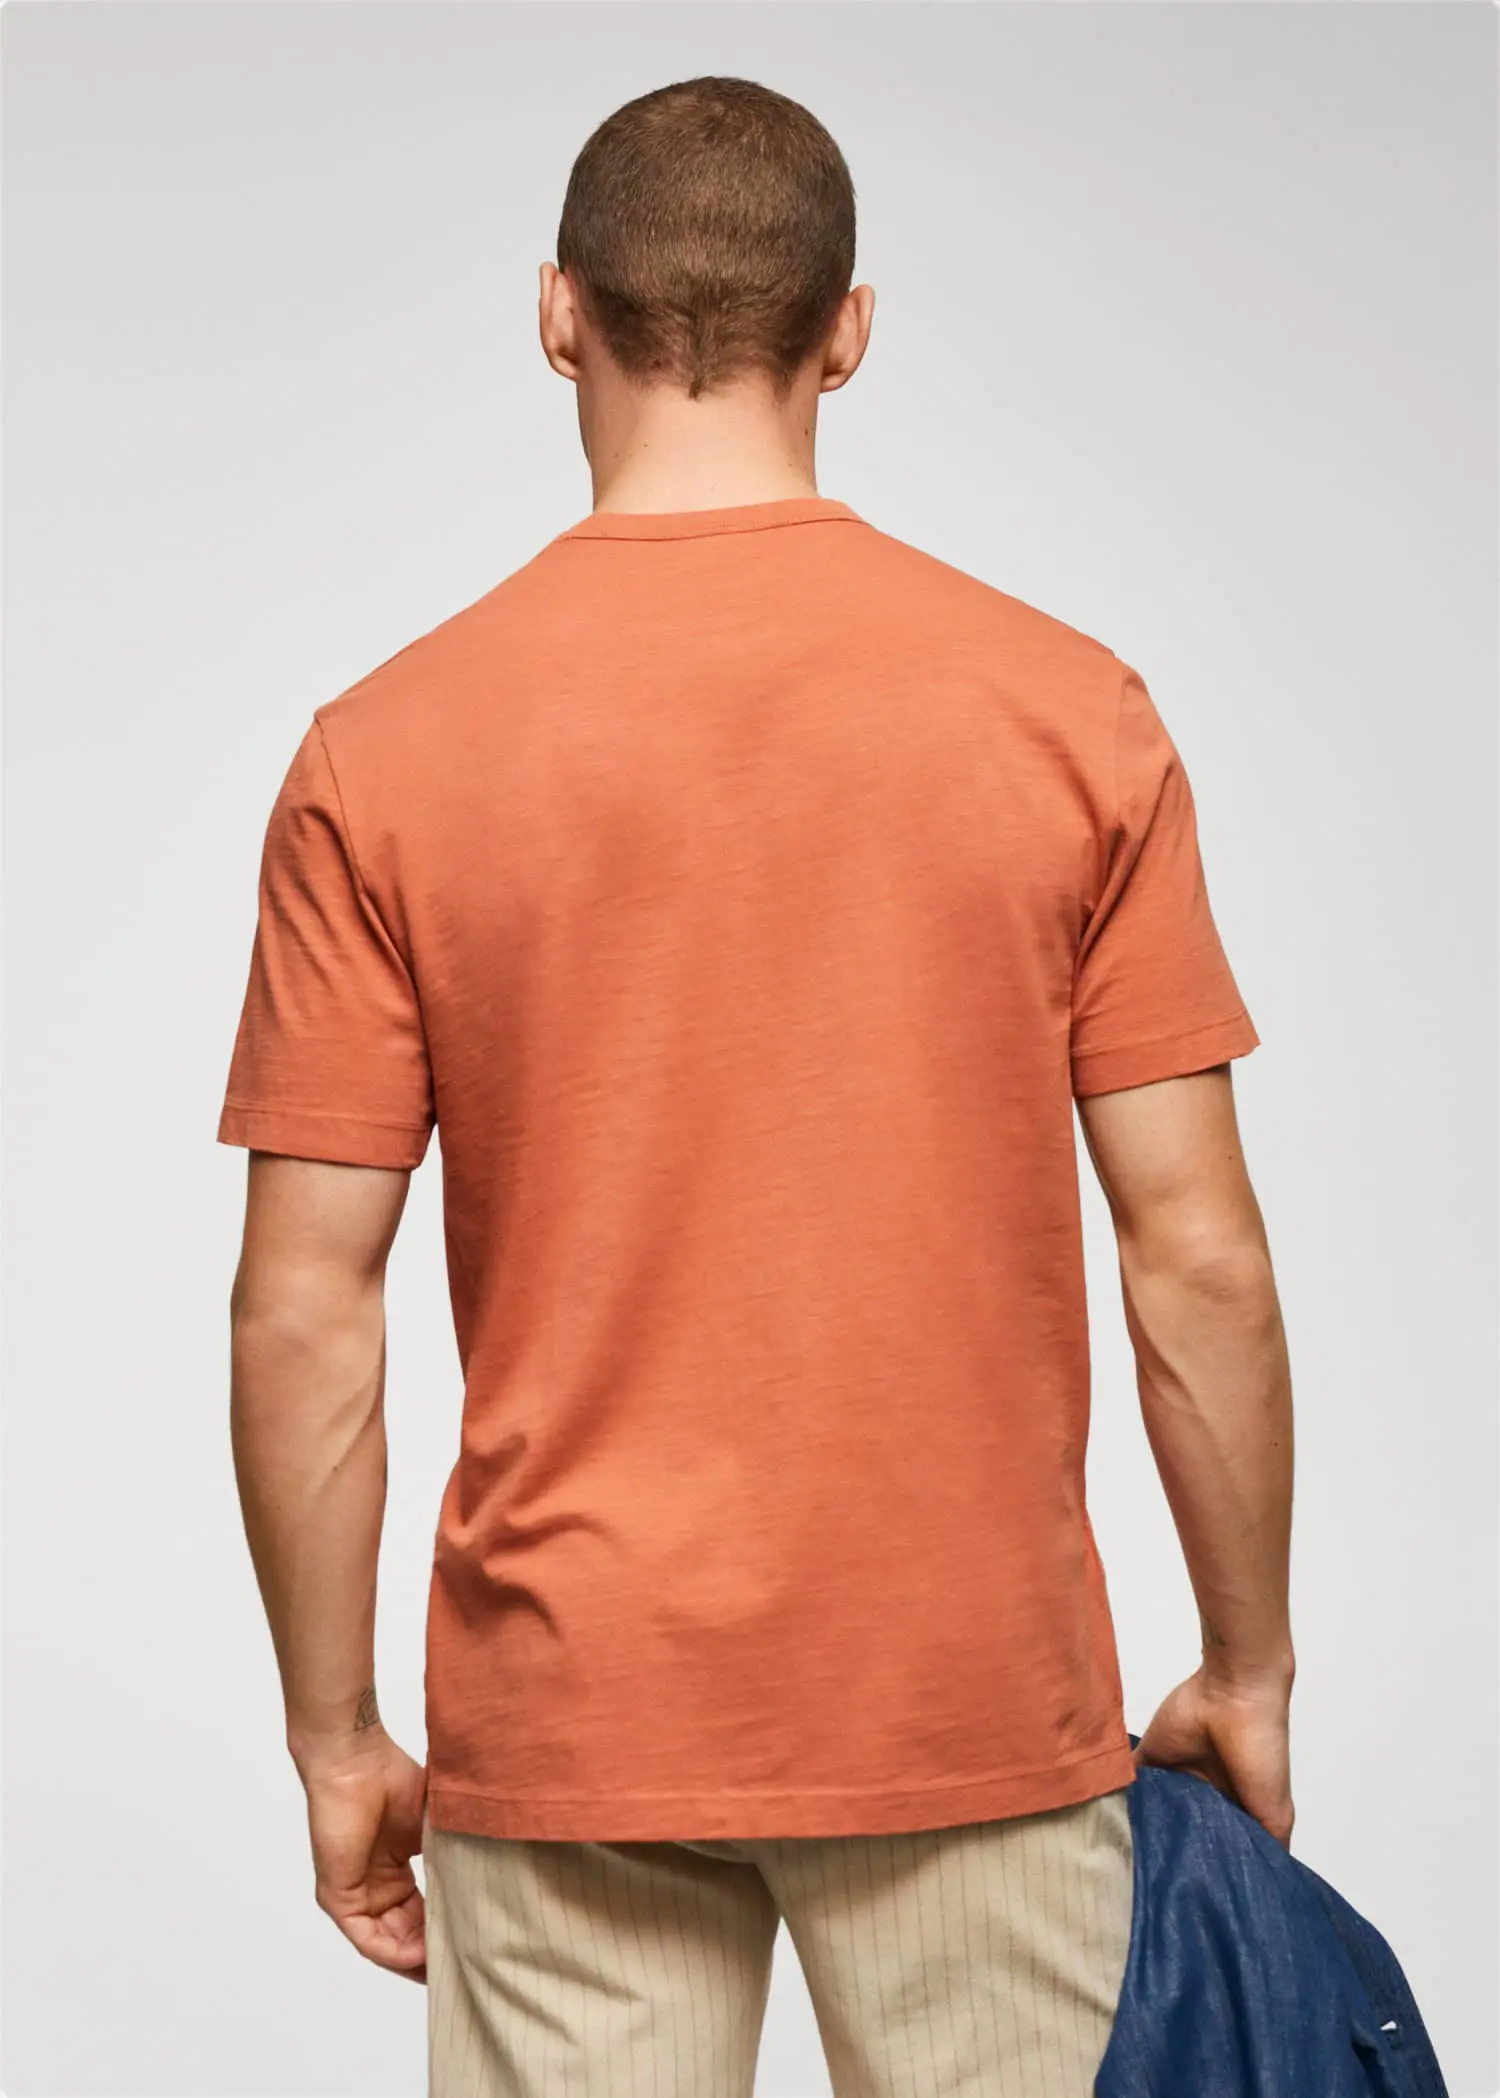 Mango 100% cotton t-shirt with pocket. a man wearing a t-shirt is standing with his hands on his hips. 